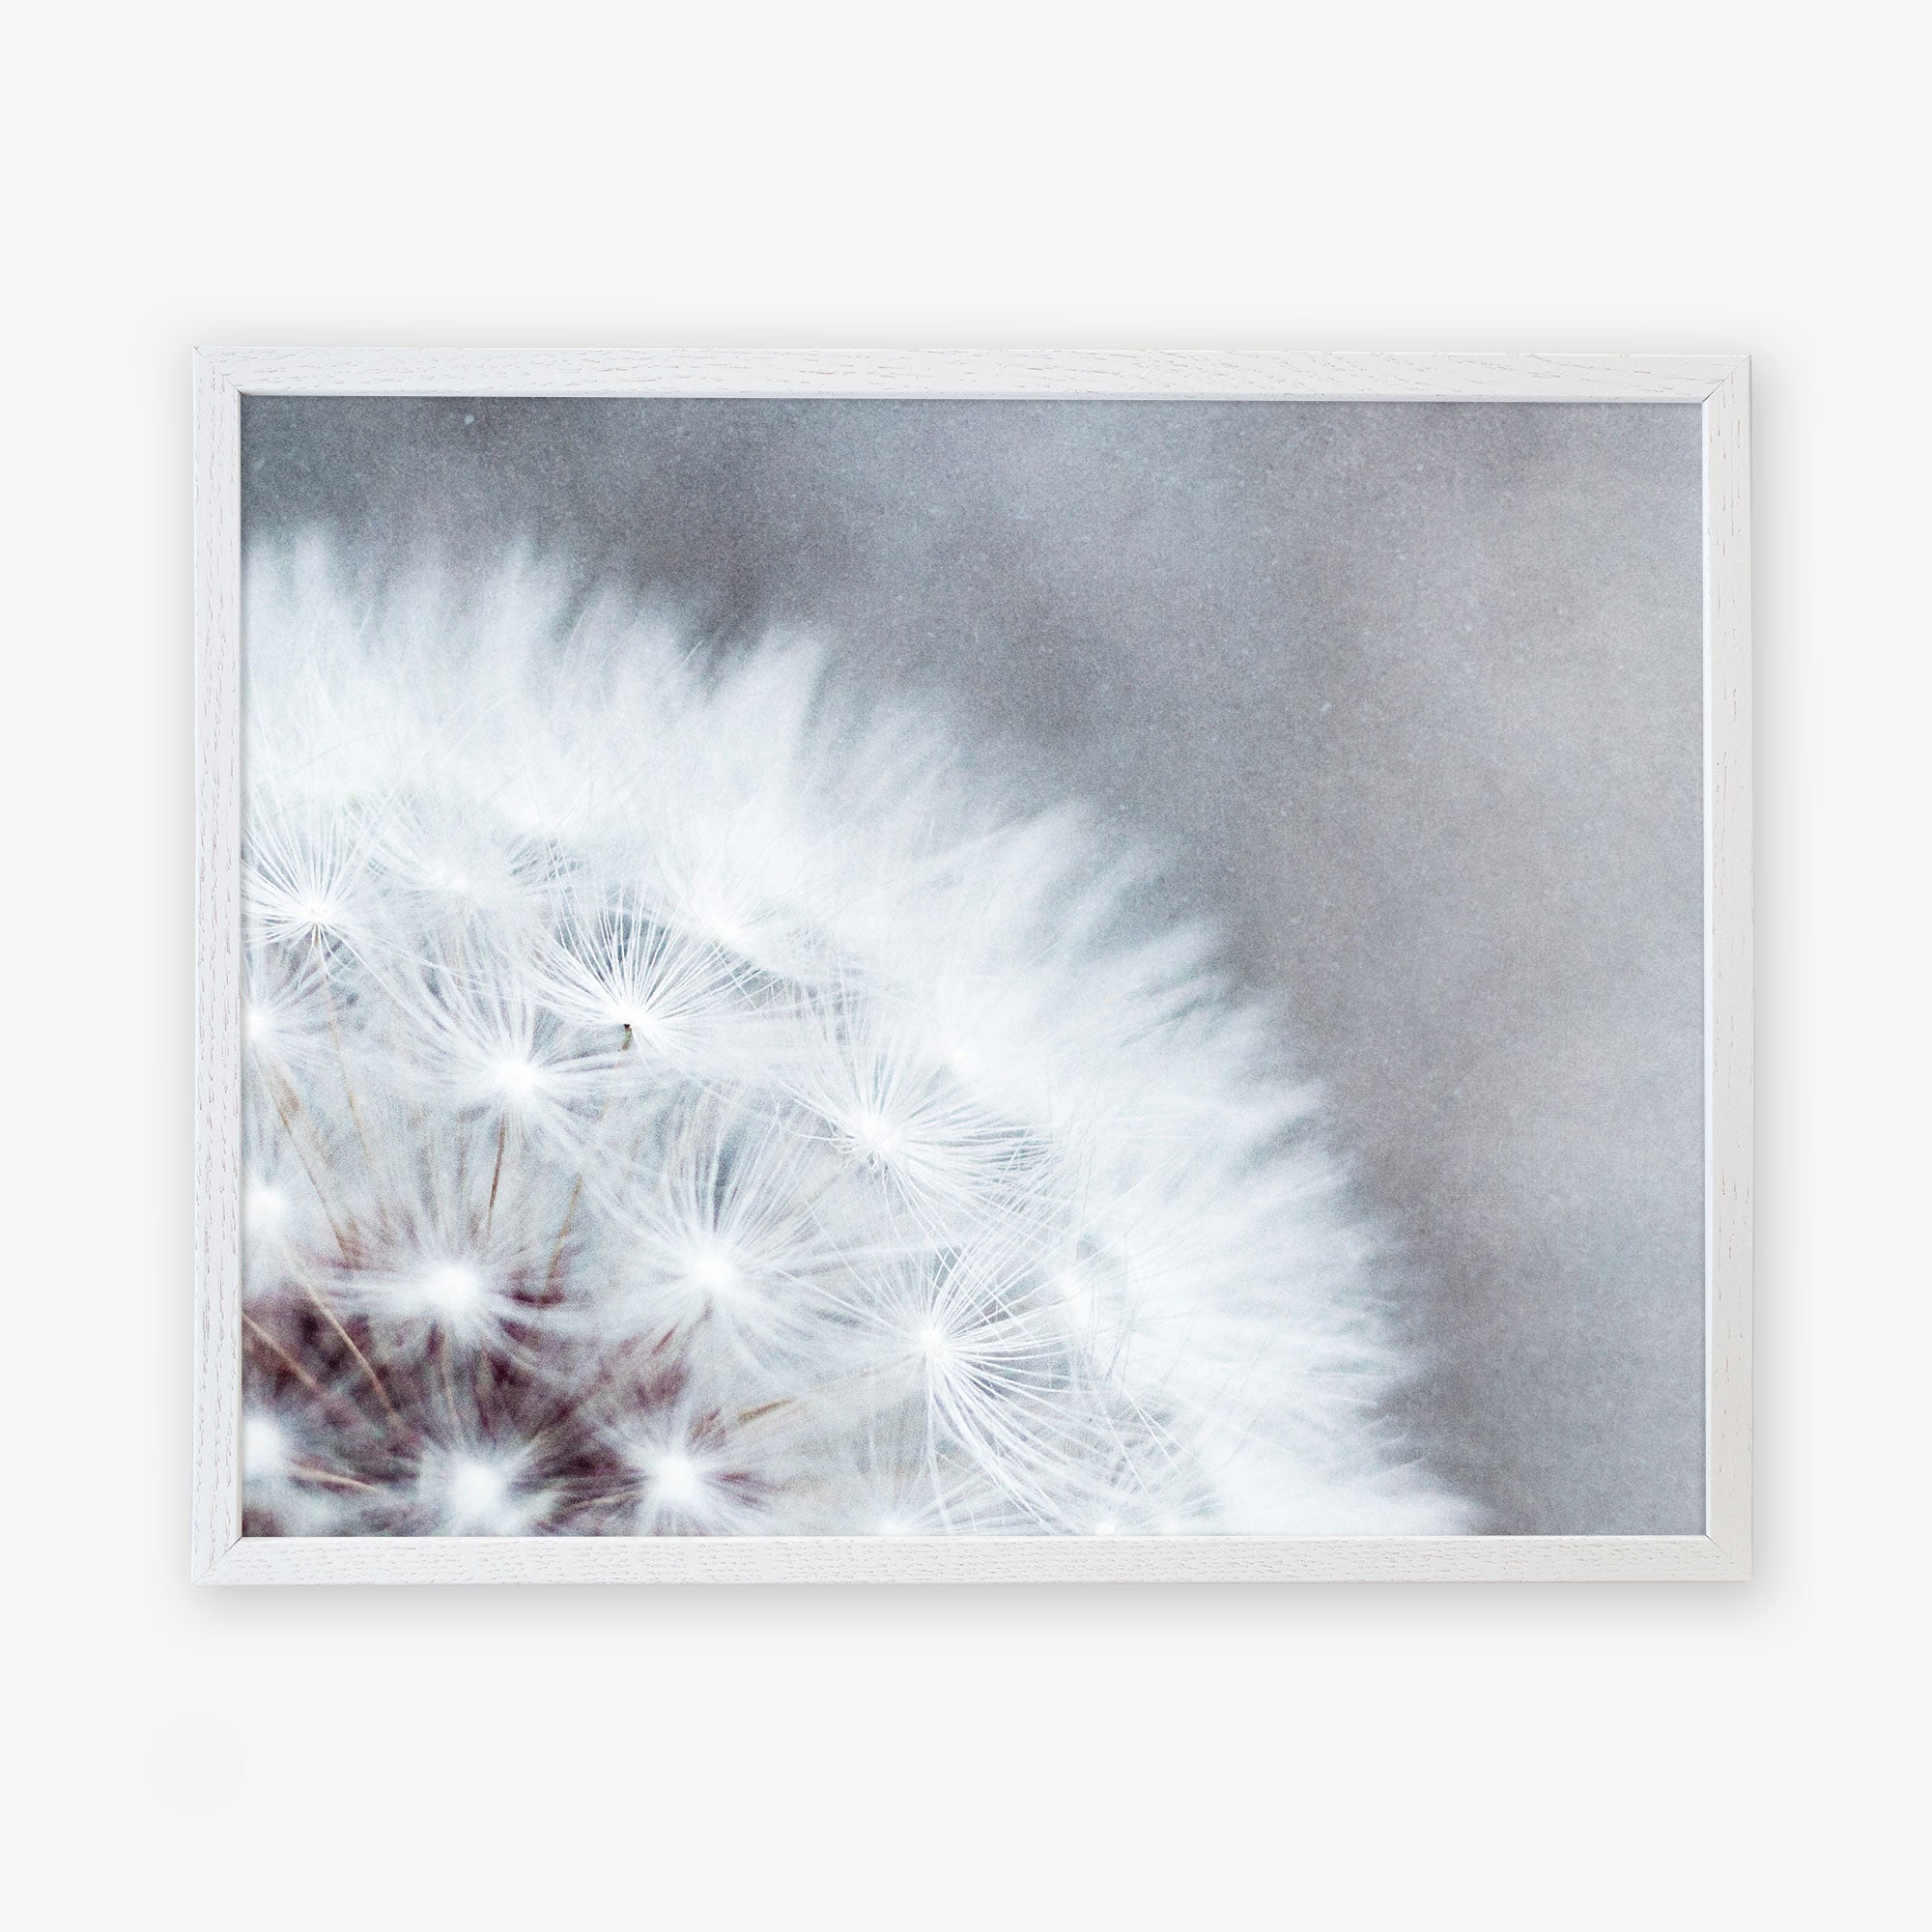 A close-up photograph of a Grey Botanical Print, &#39;Dandelion Queen&#39; by Offley Green, displaying delicate, fine seed structures. The image is framed on a white background for clarity and focus.